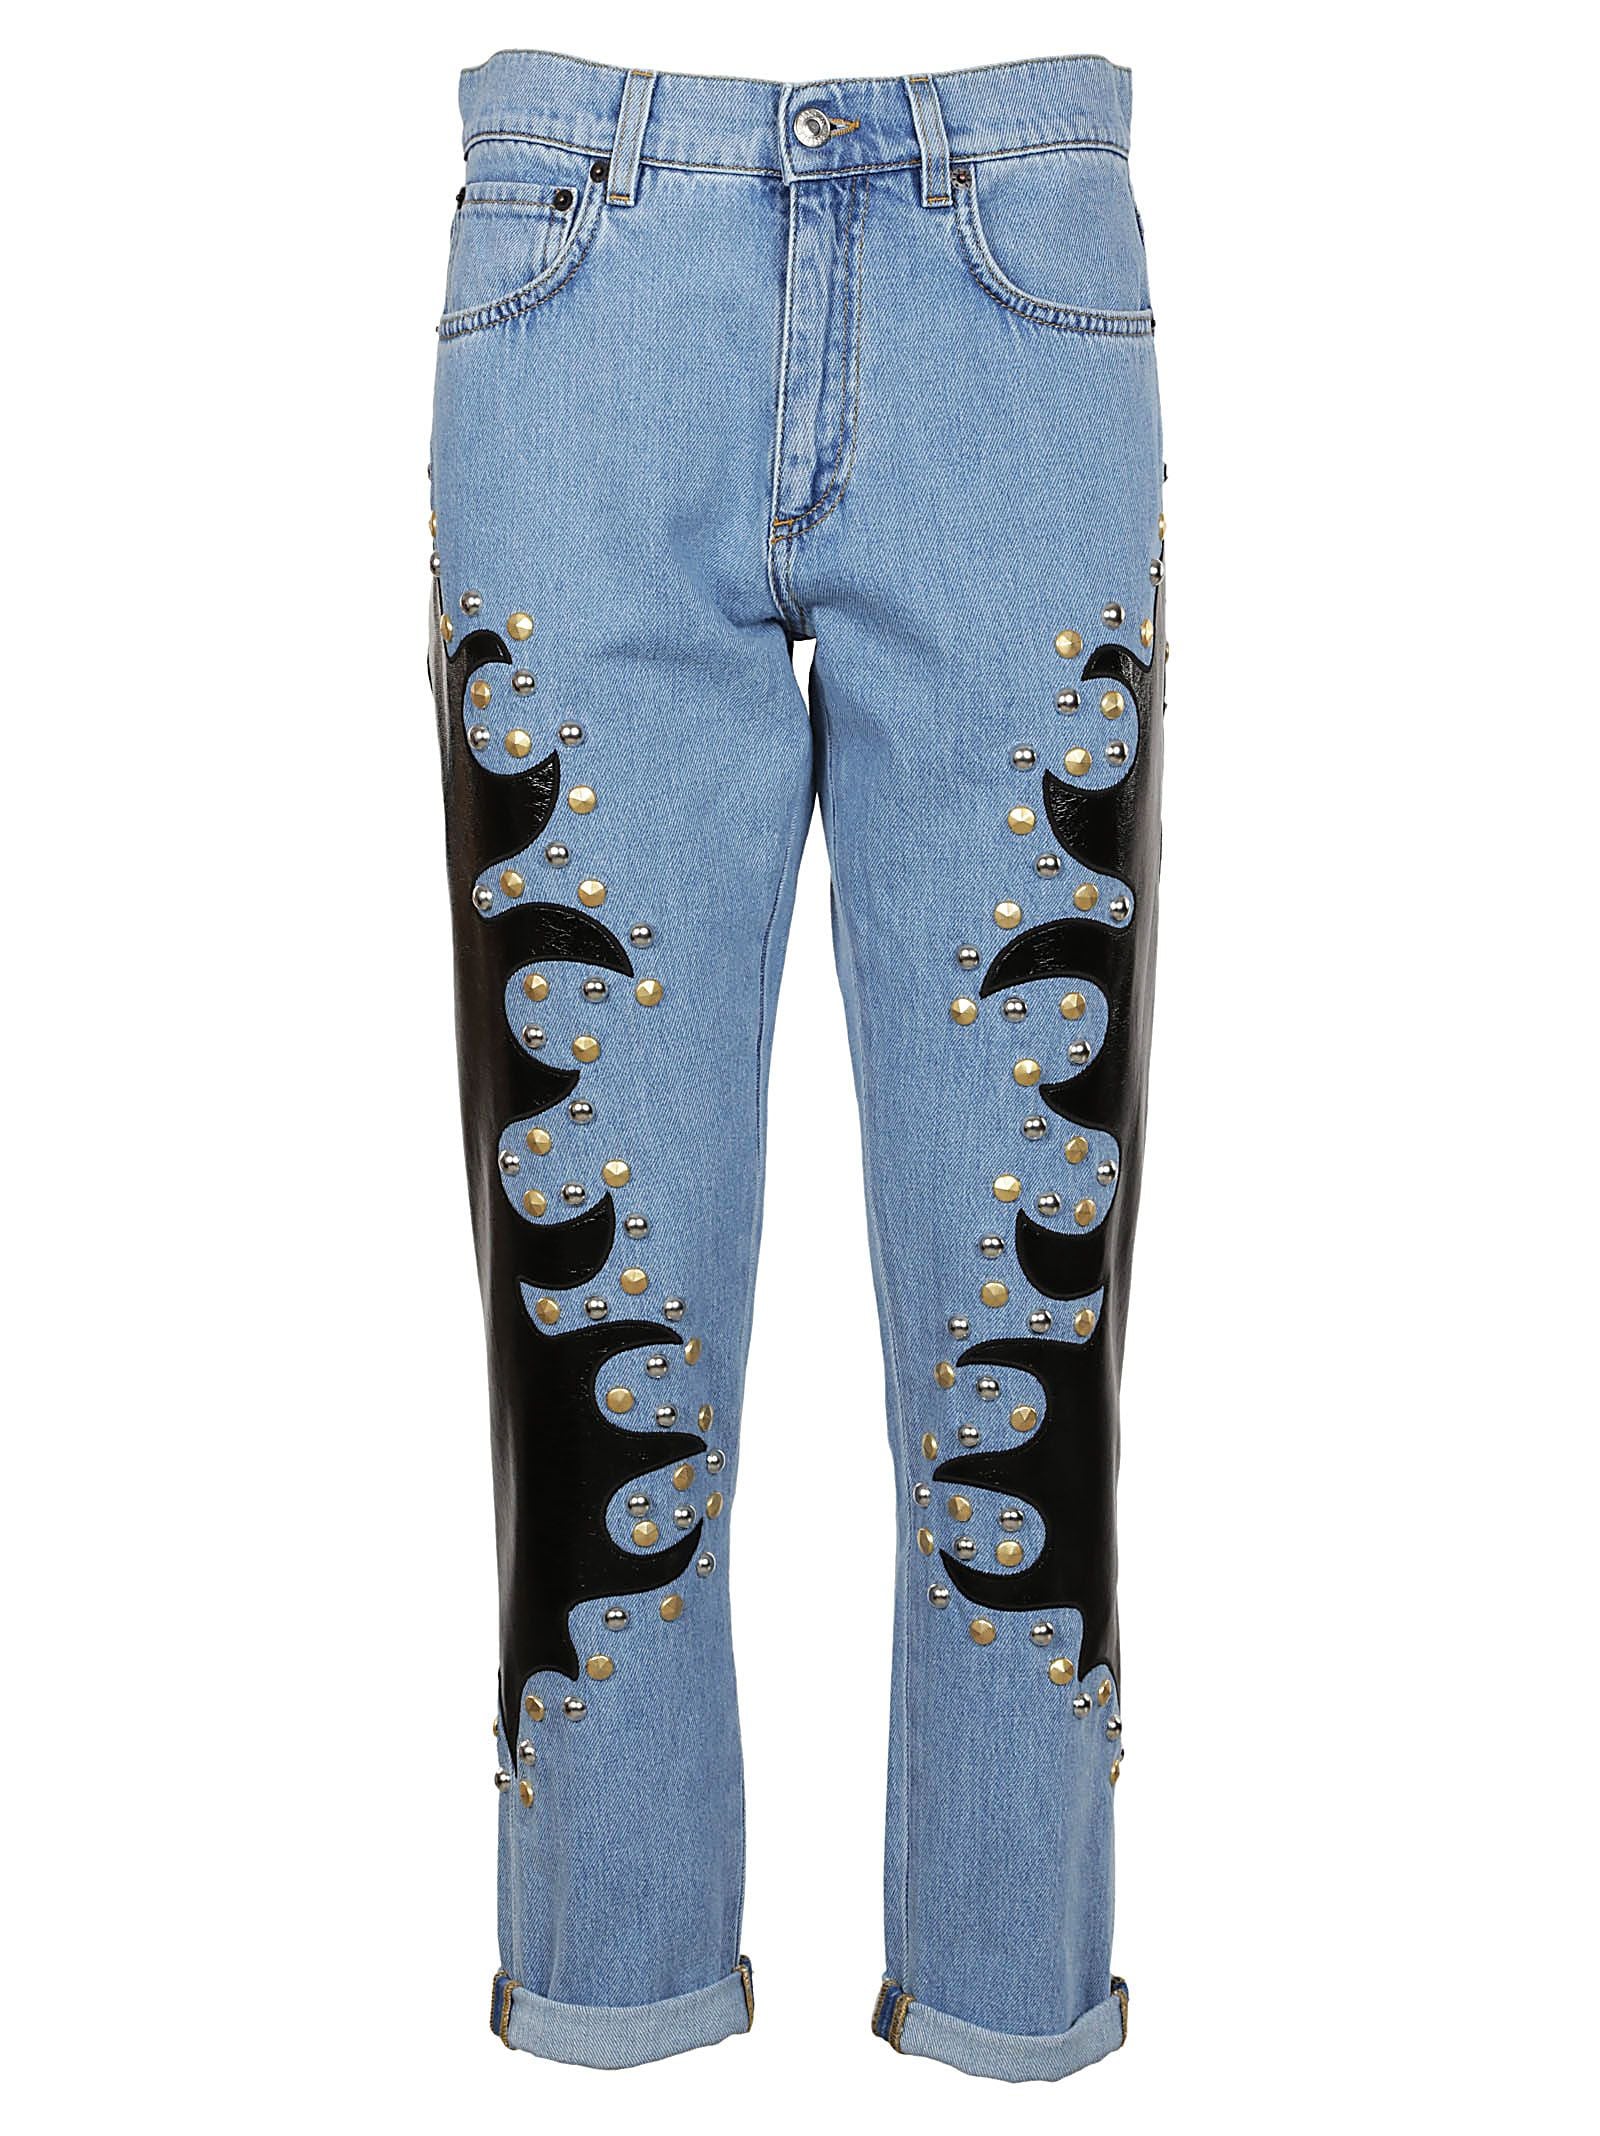 Jeans With Patches | POPSUGAR Fashion